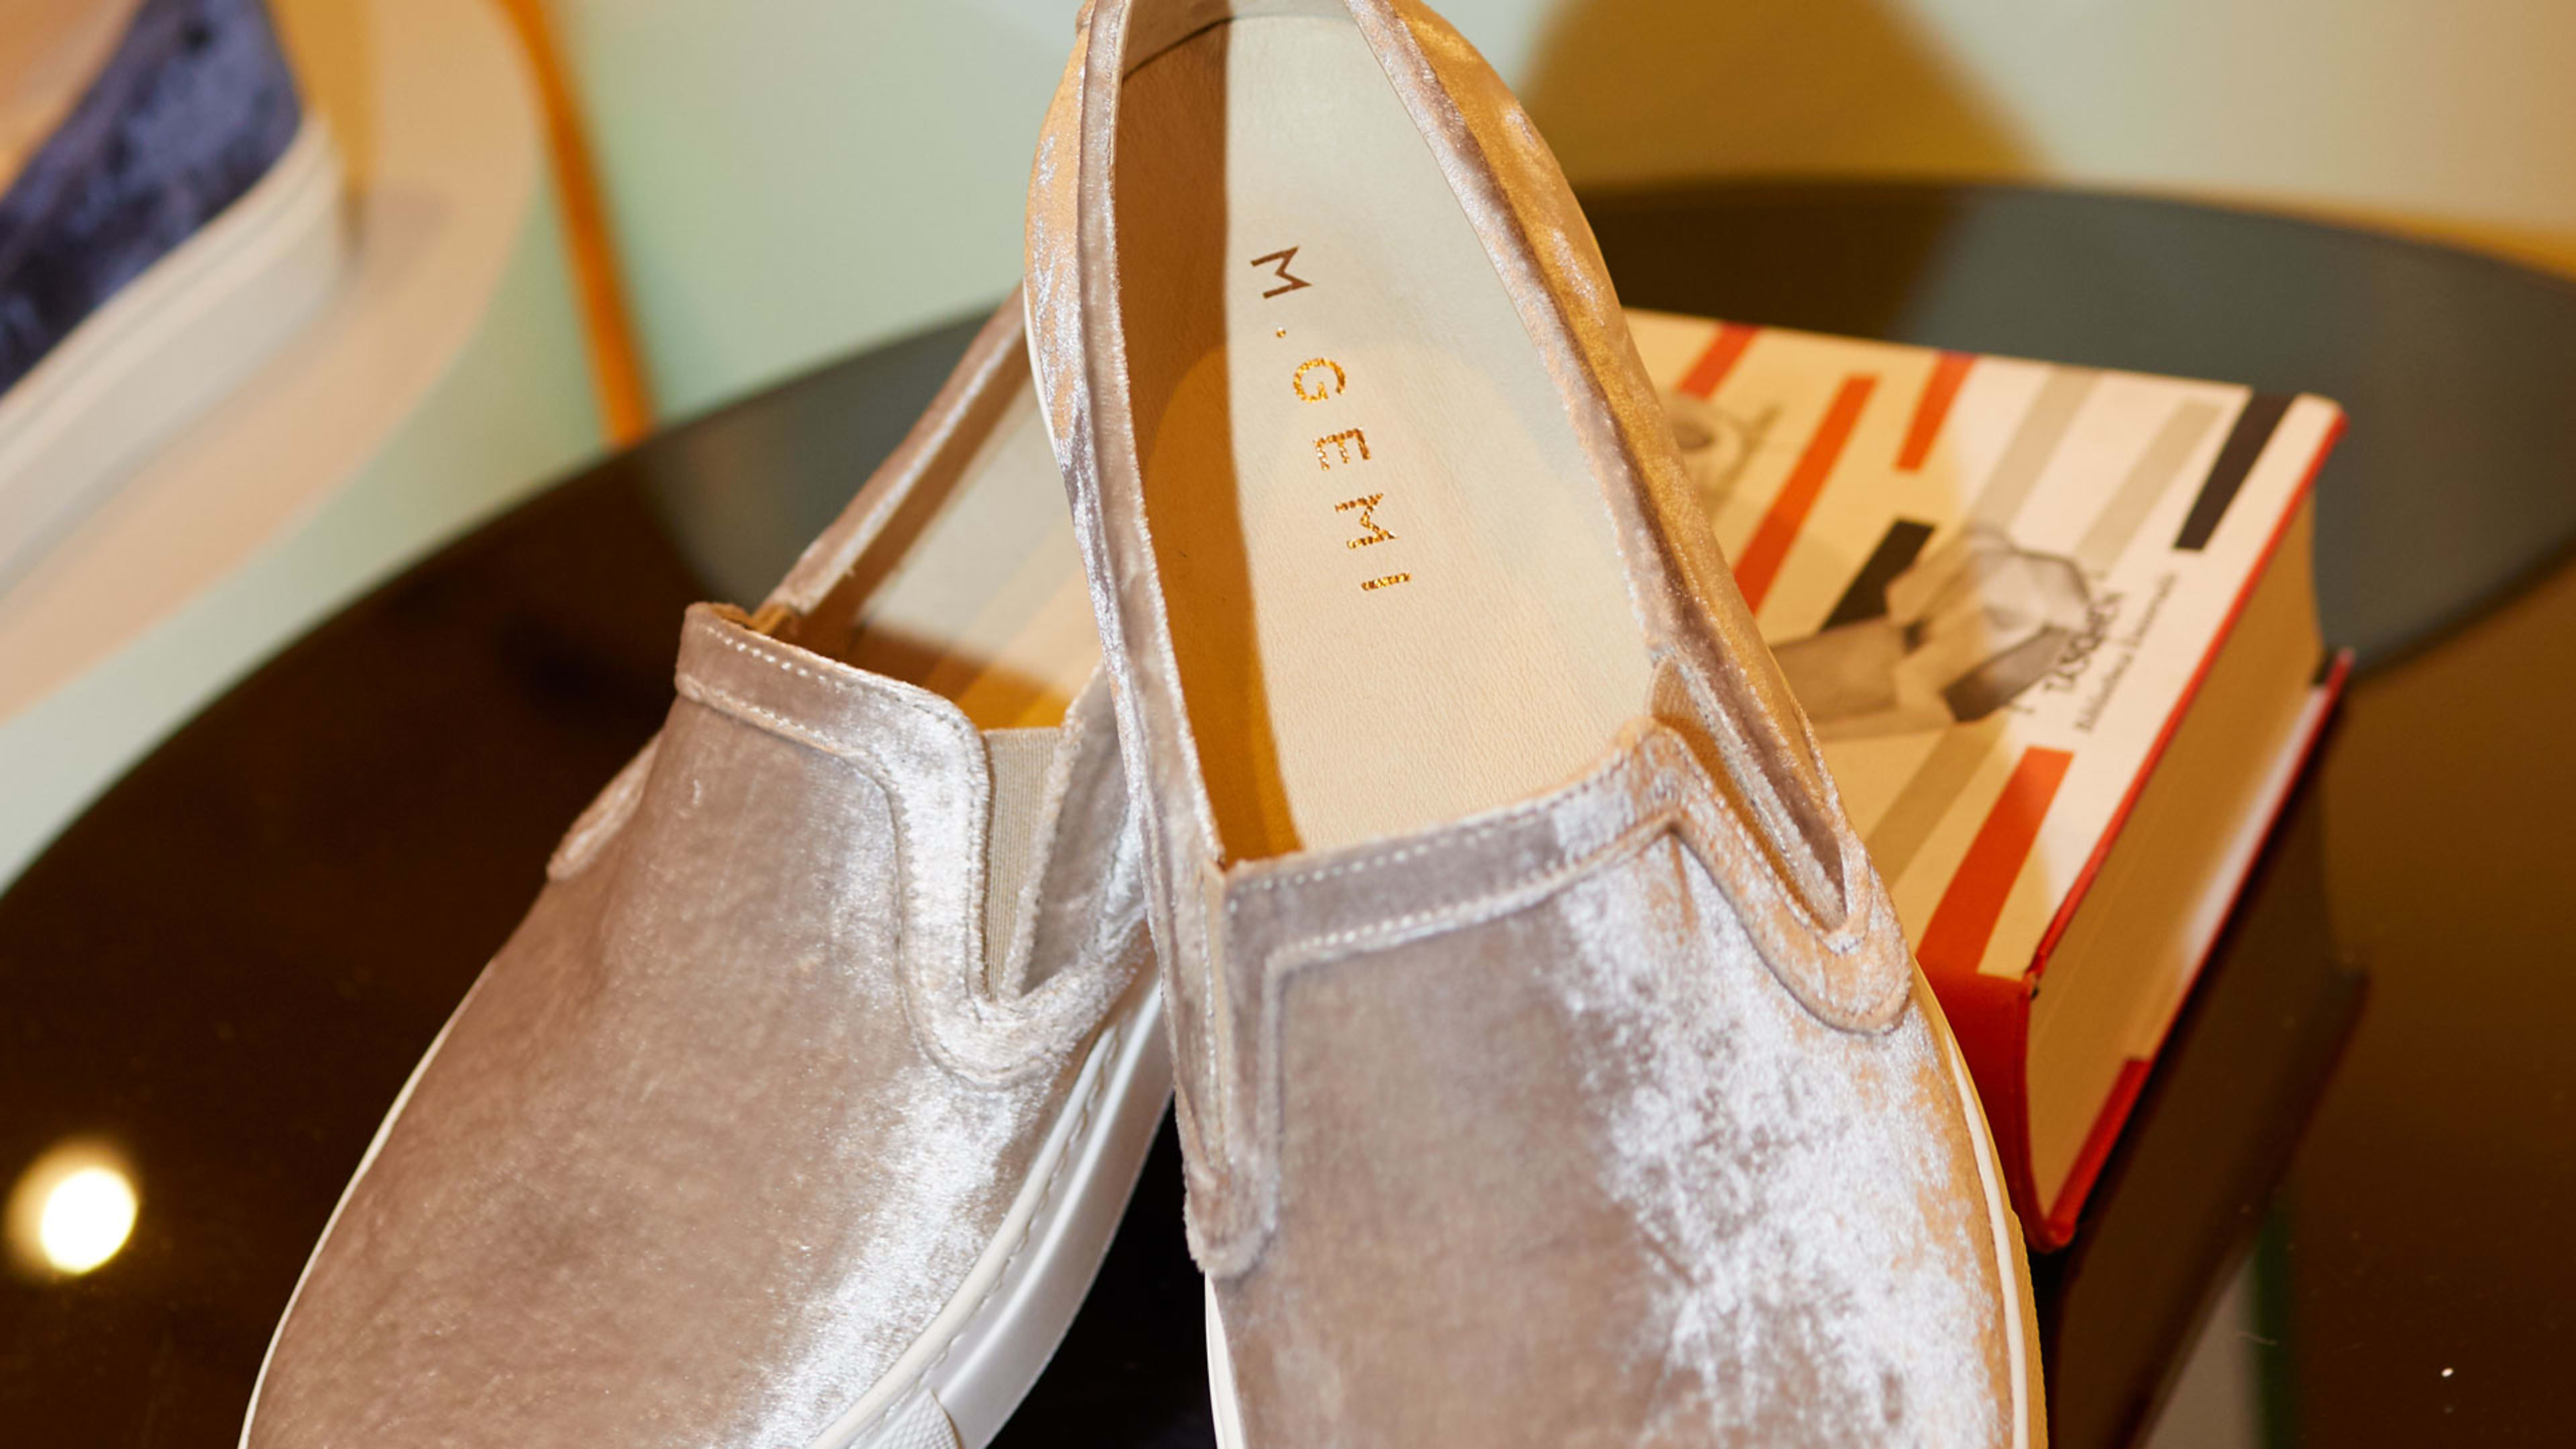 M.Gemi Feeds Our Luxury Shoe Addiction With Affordable, Italian-Made Heels